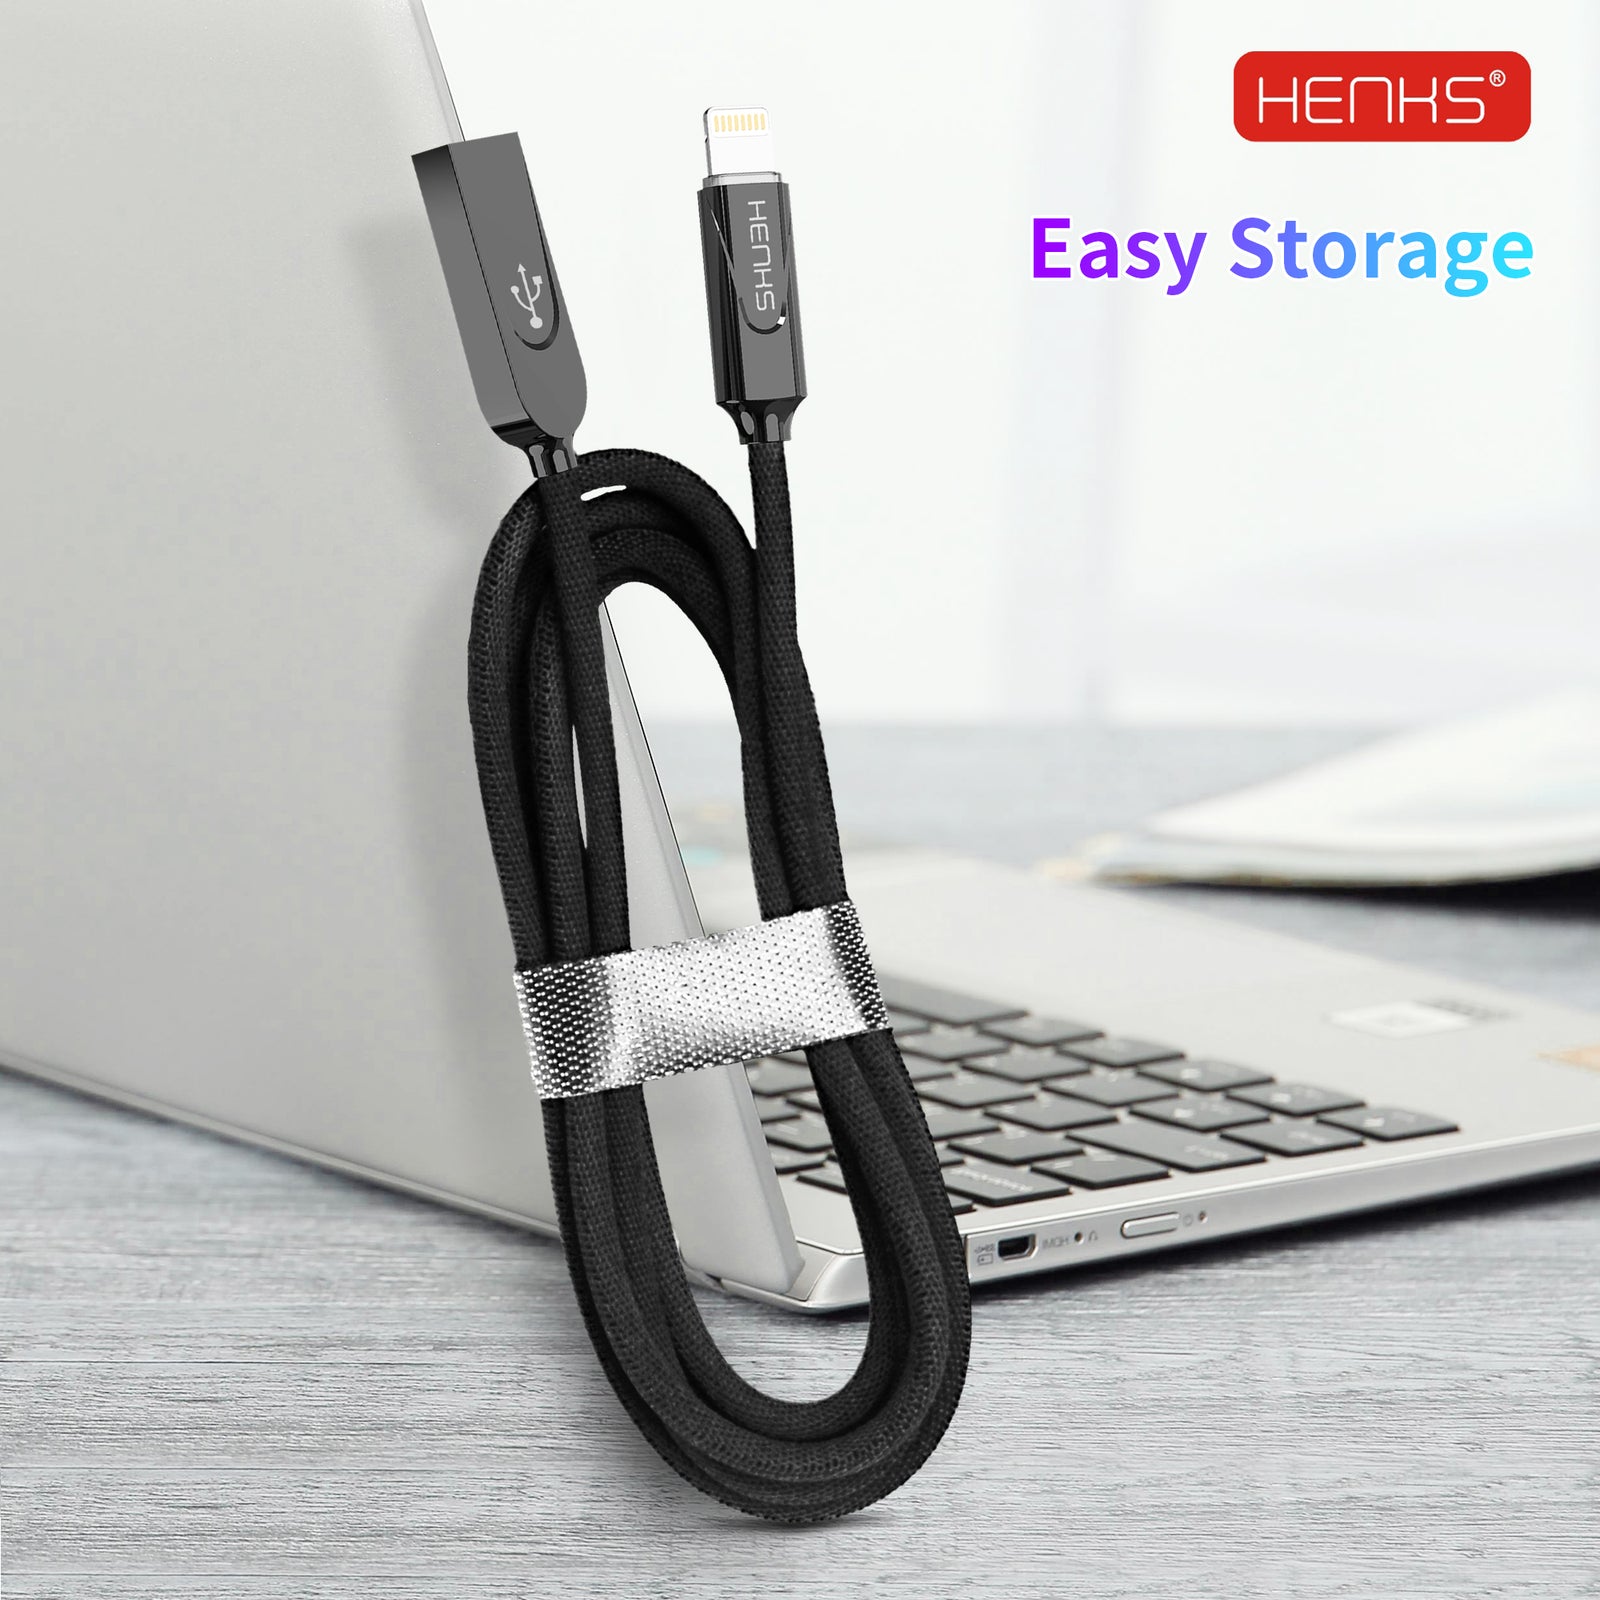 HENKS® Premium Connector Auto Disconnect Charging Cable for iPhone